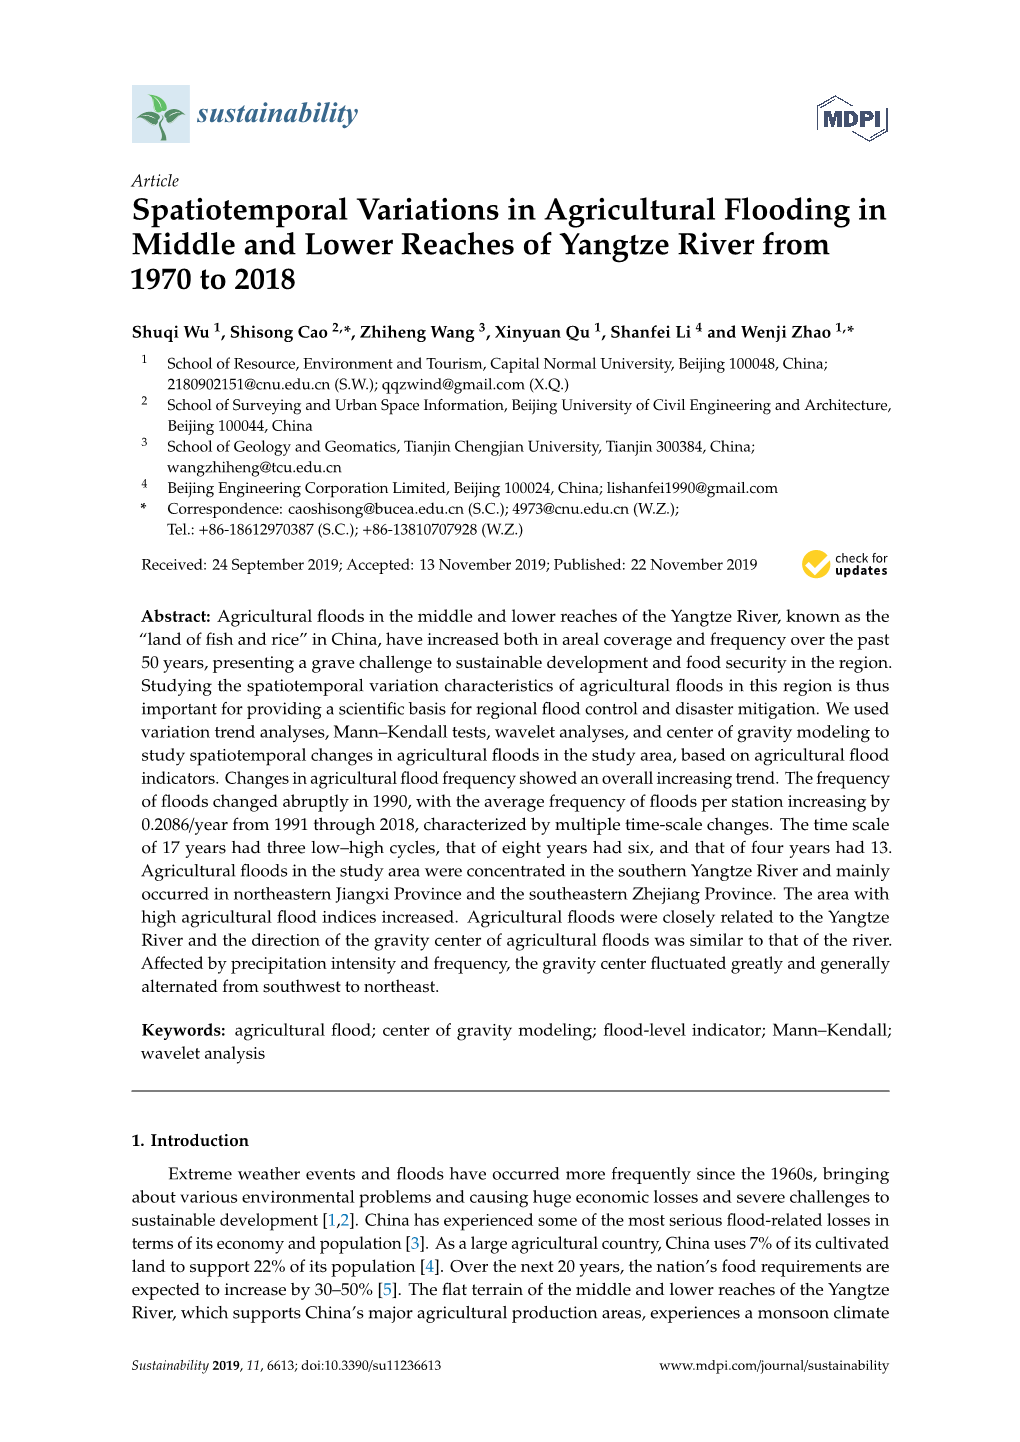 Spatiotemporal Variations in Agricultural Flooding in Middle and Lower Reaches of Yangtze River from 1970 to 2018